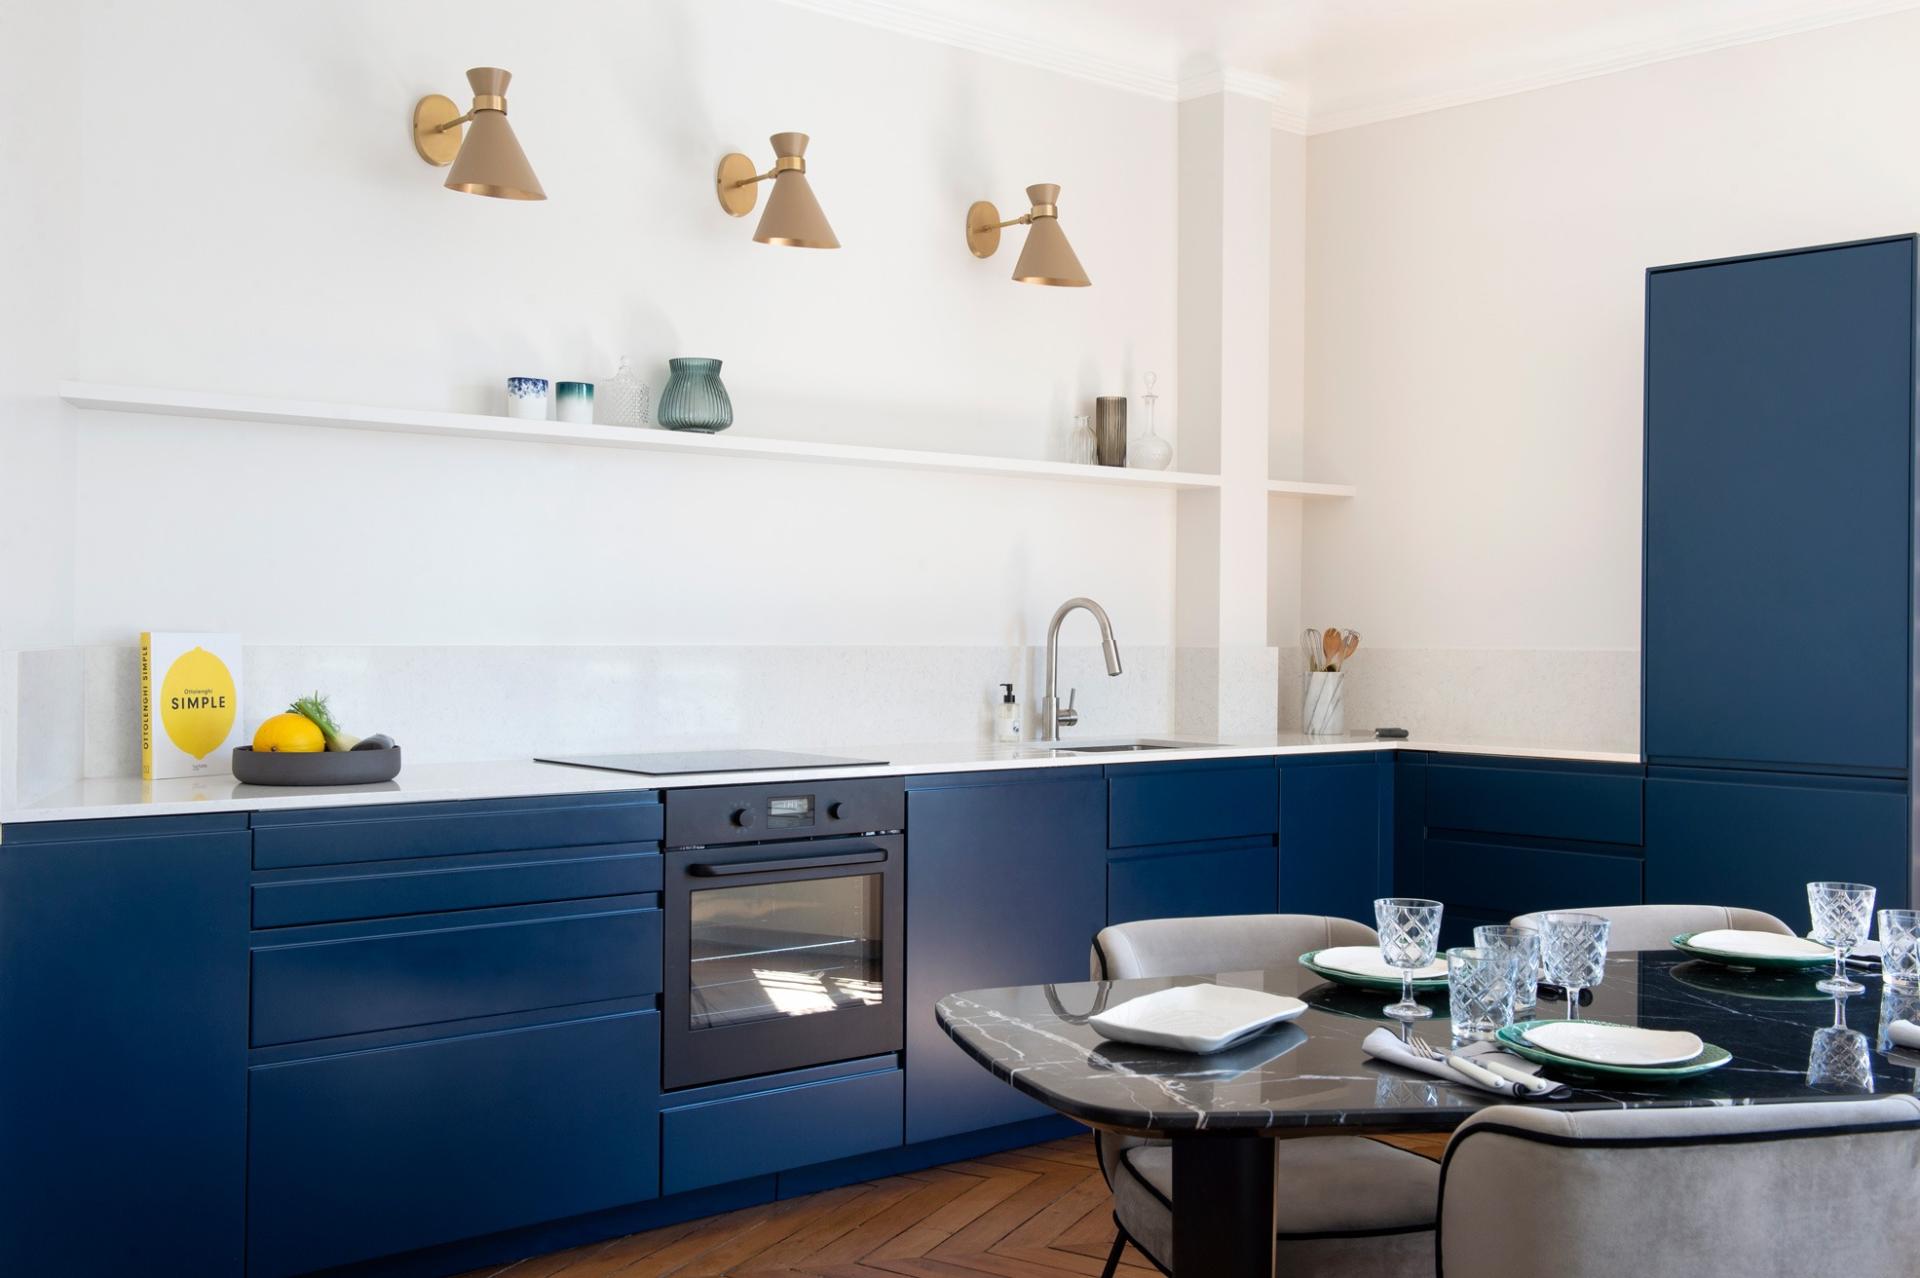 Blue nuit kitchen by Camille Gabrielle - Photos by Flora Fourcade